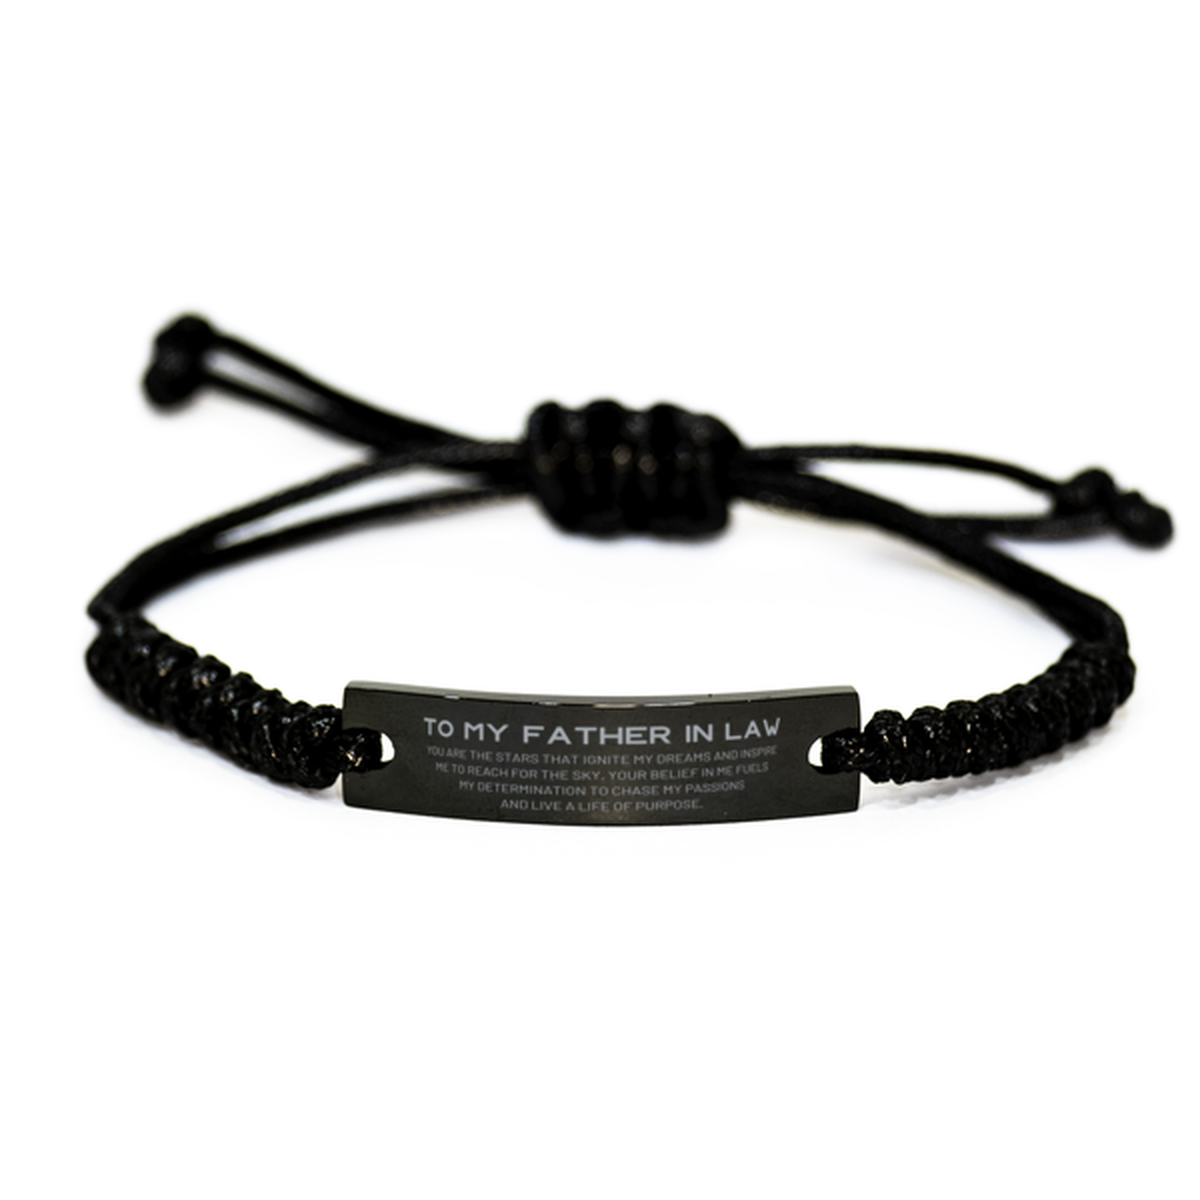 To My Father In Law Black Rope Bracelet, You are the stars that ignite my dreams and inspire me to reach for the sky, Birthday Unique Gifts For Father In Law, Thank You Gifts For Father In Law